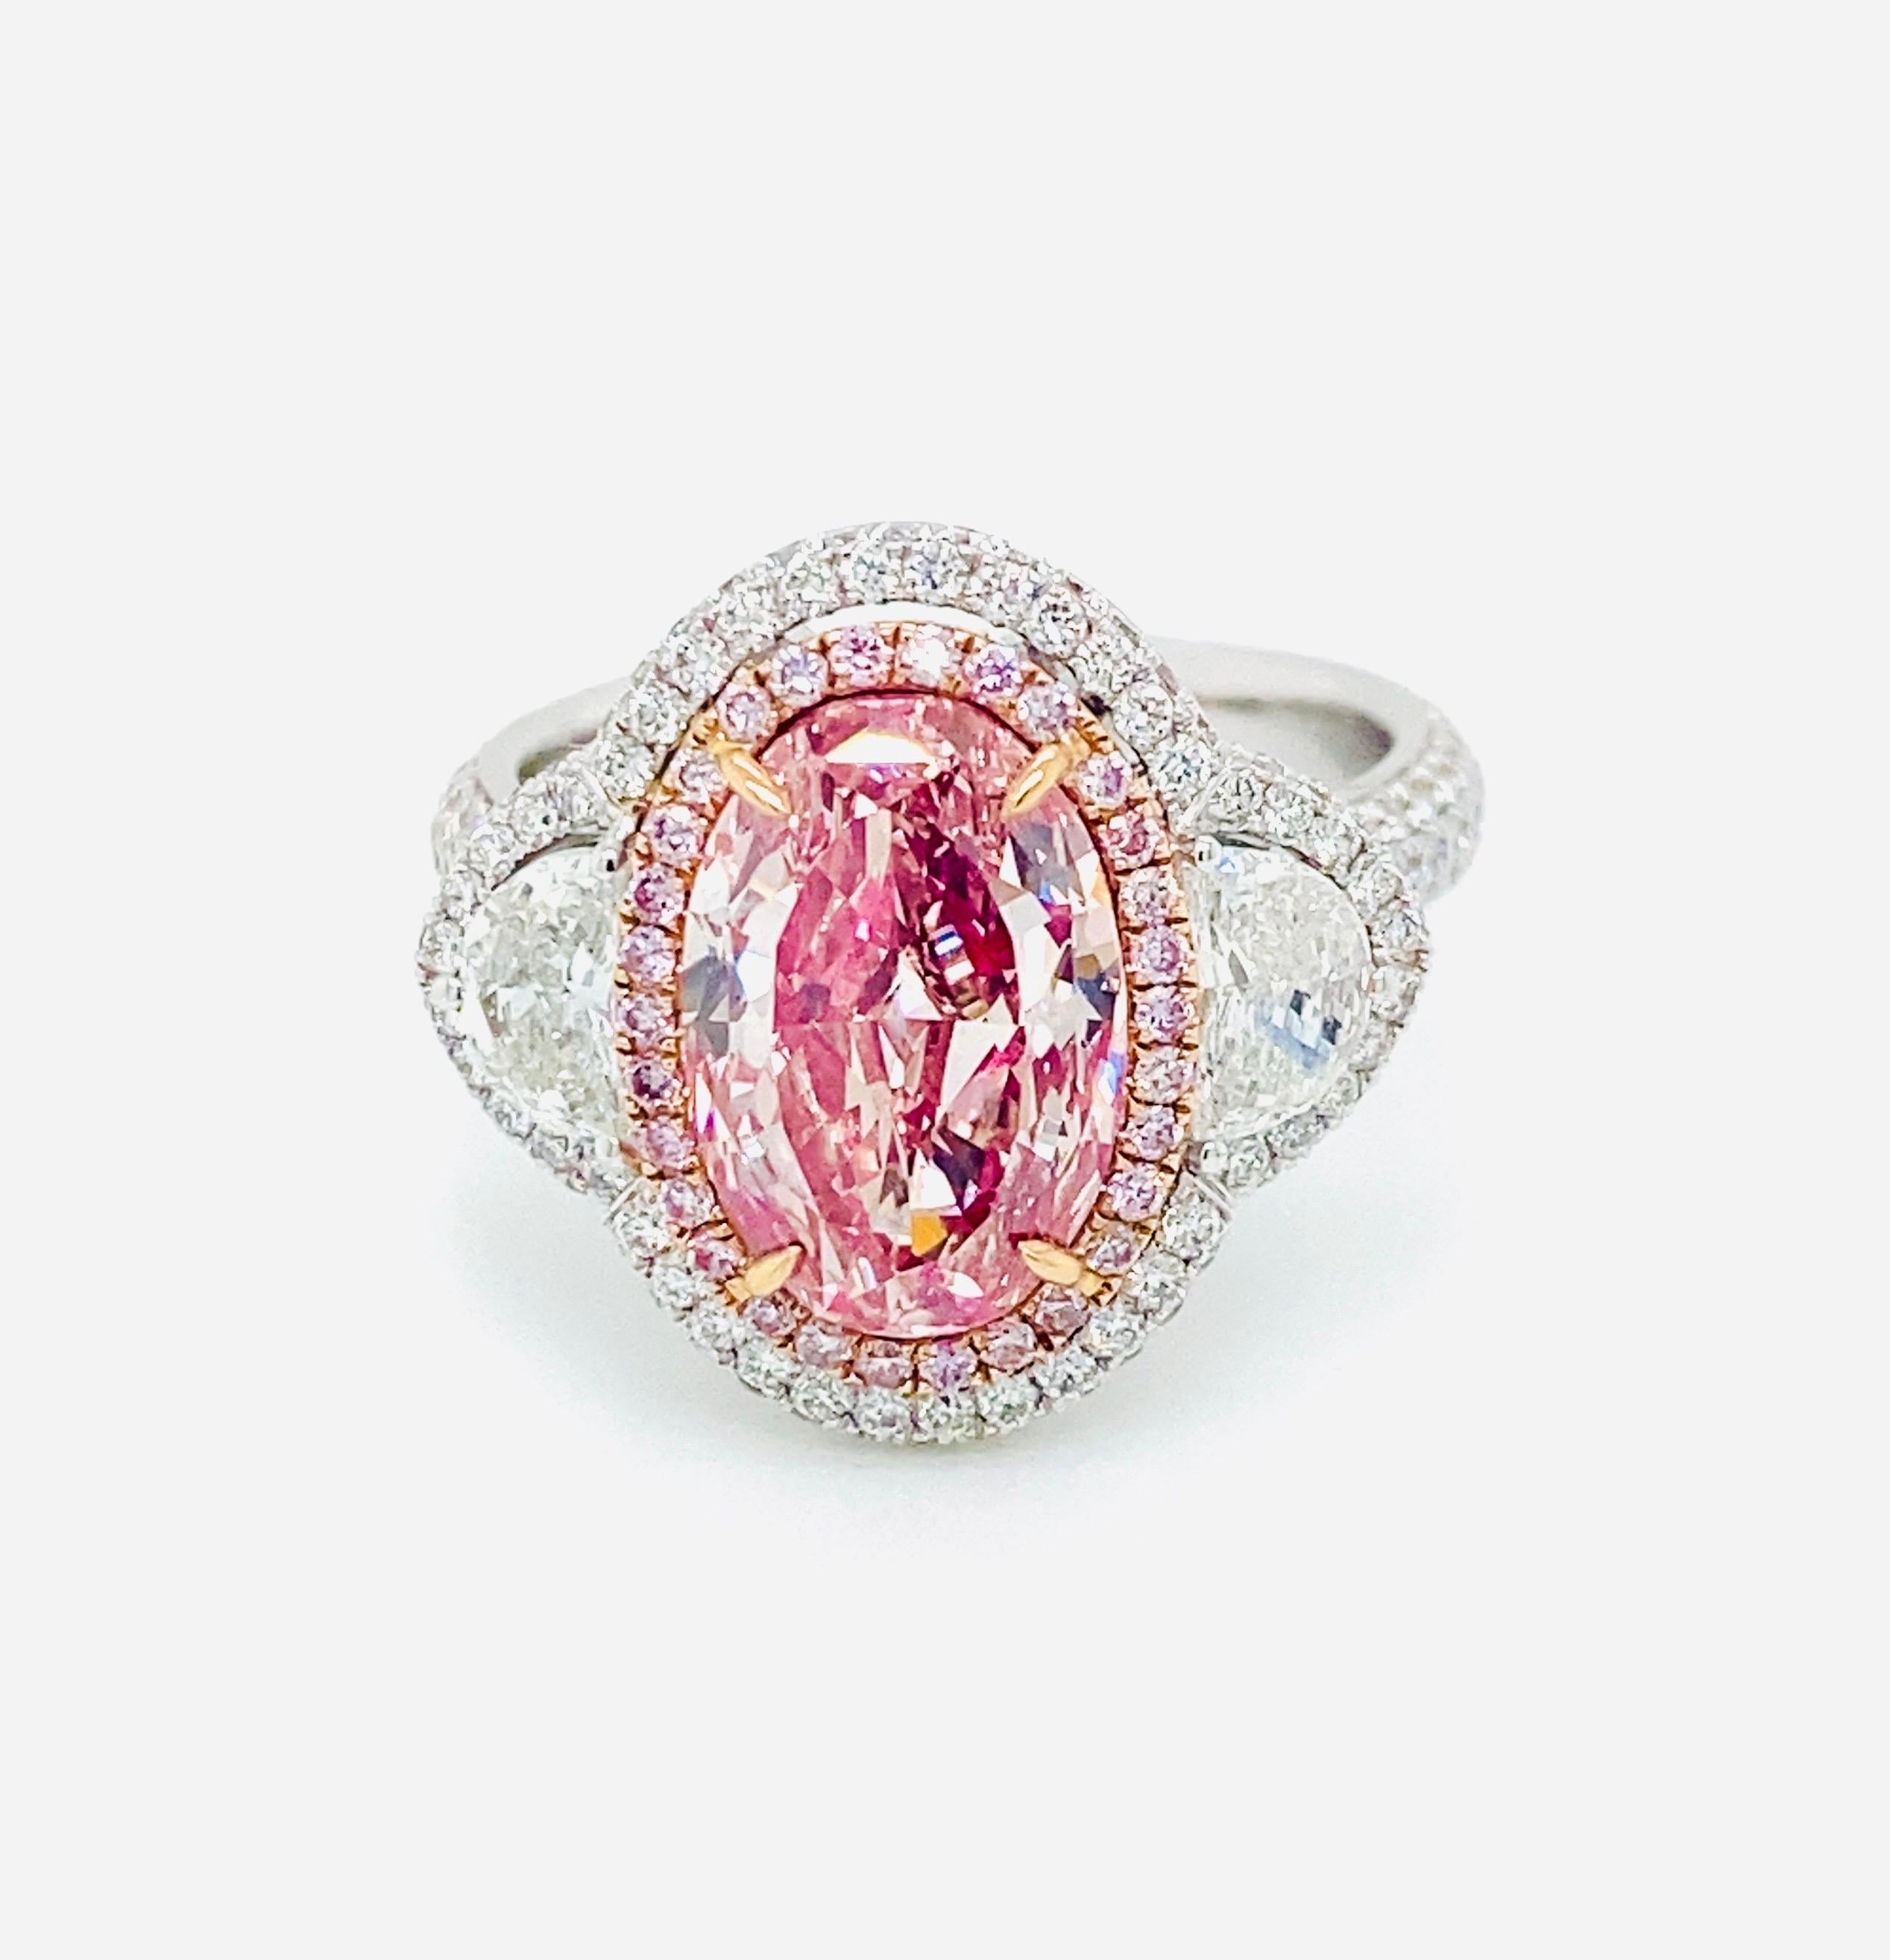 Emilio Jewelry Gia Certified 3.00 Carat Oval Pink Diamond Ring  For Sale 1